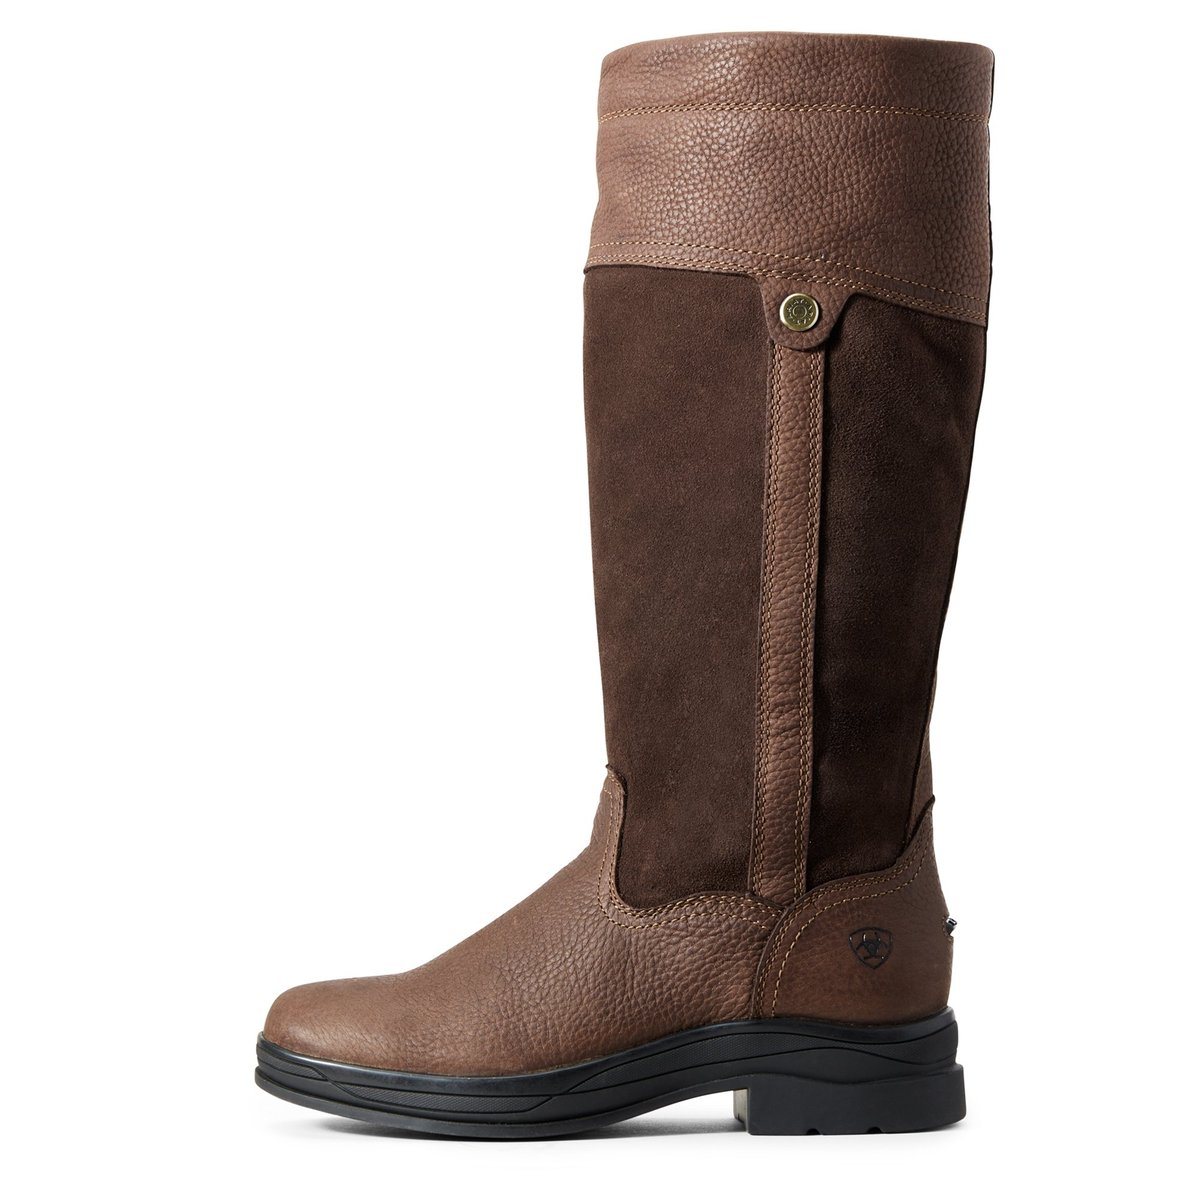 ARIAT WINDERMERE 11 H20 LADIES BOOTS BROWN - Robinsons Equestrian